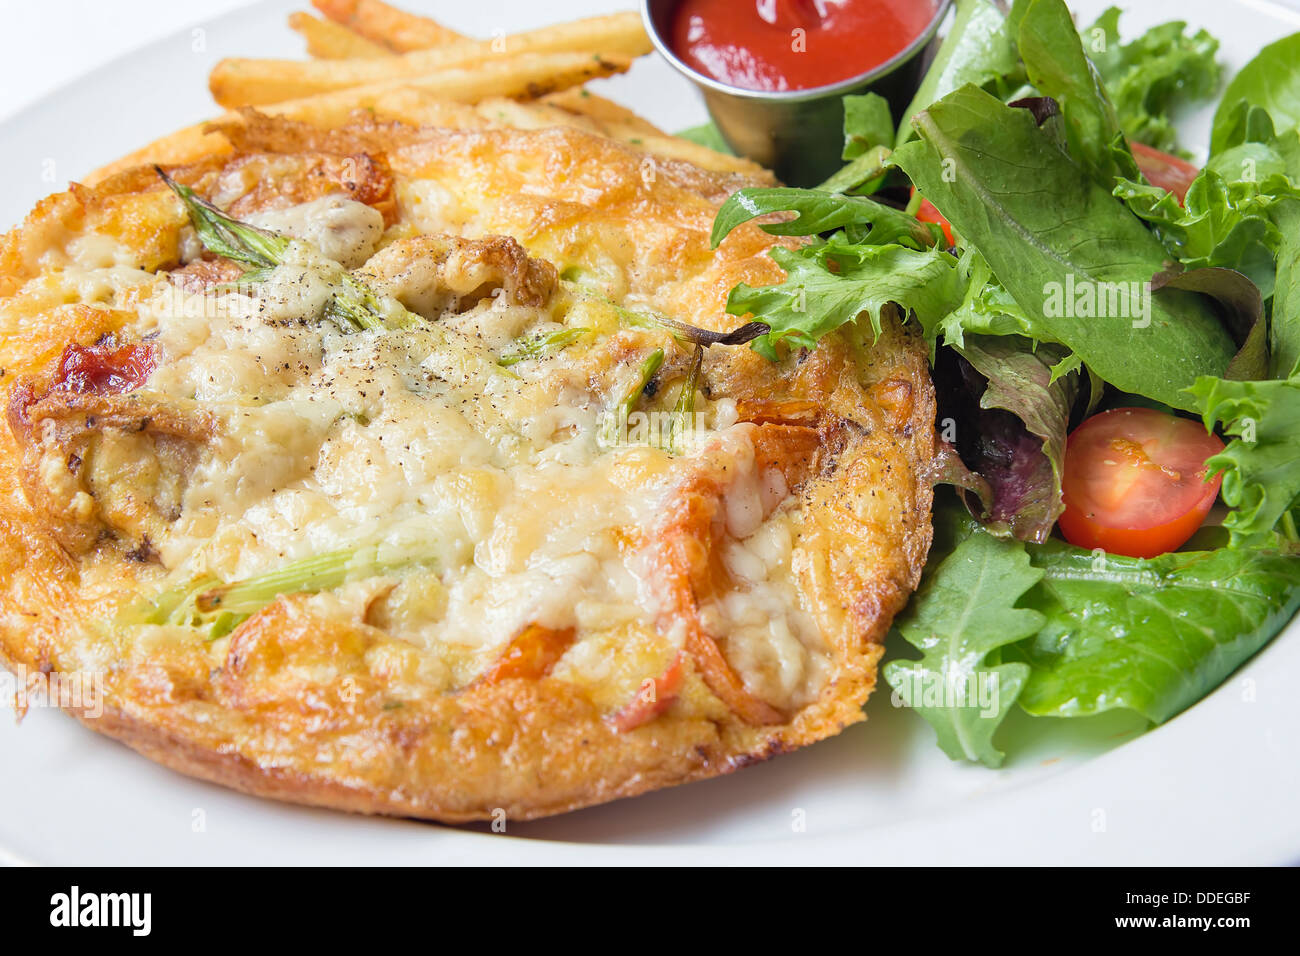 Frittata Egg Dish with Cheese Sun Dried Tomato Sauteed Onions Vegetable with Organic Green Salad Closeup Stock Photo